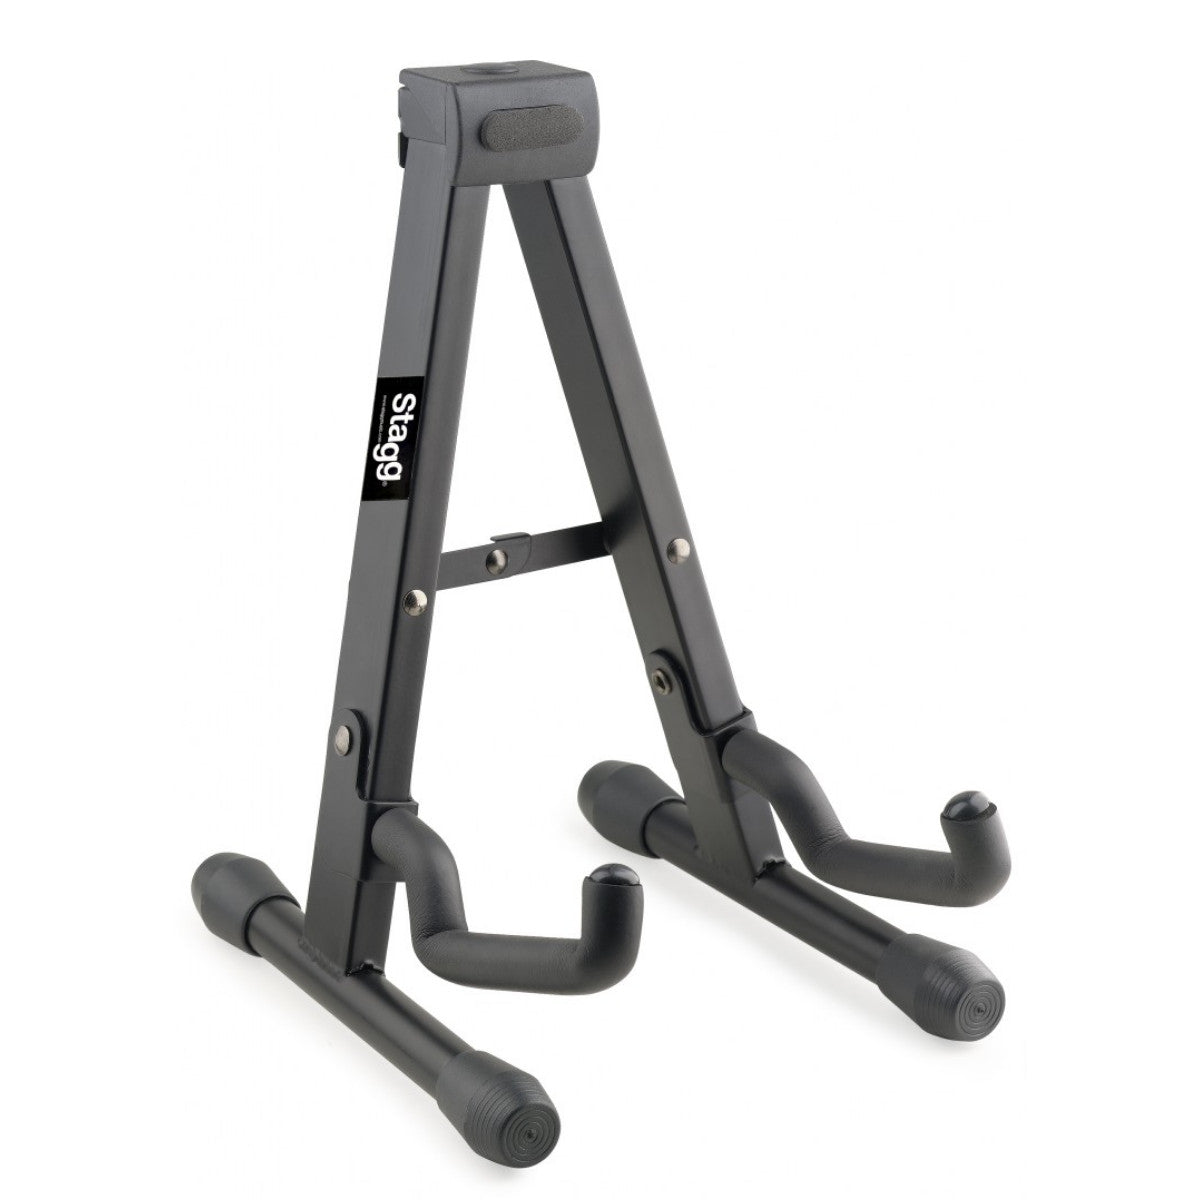 Shiver - Stand guitare col de cygne basic - Stands et accroches